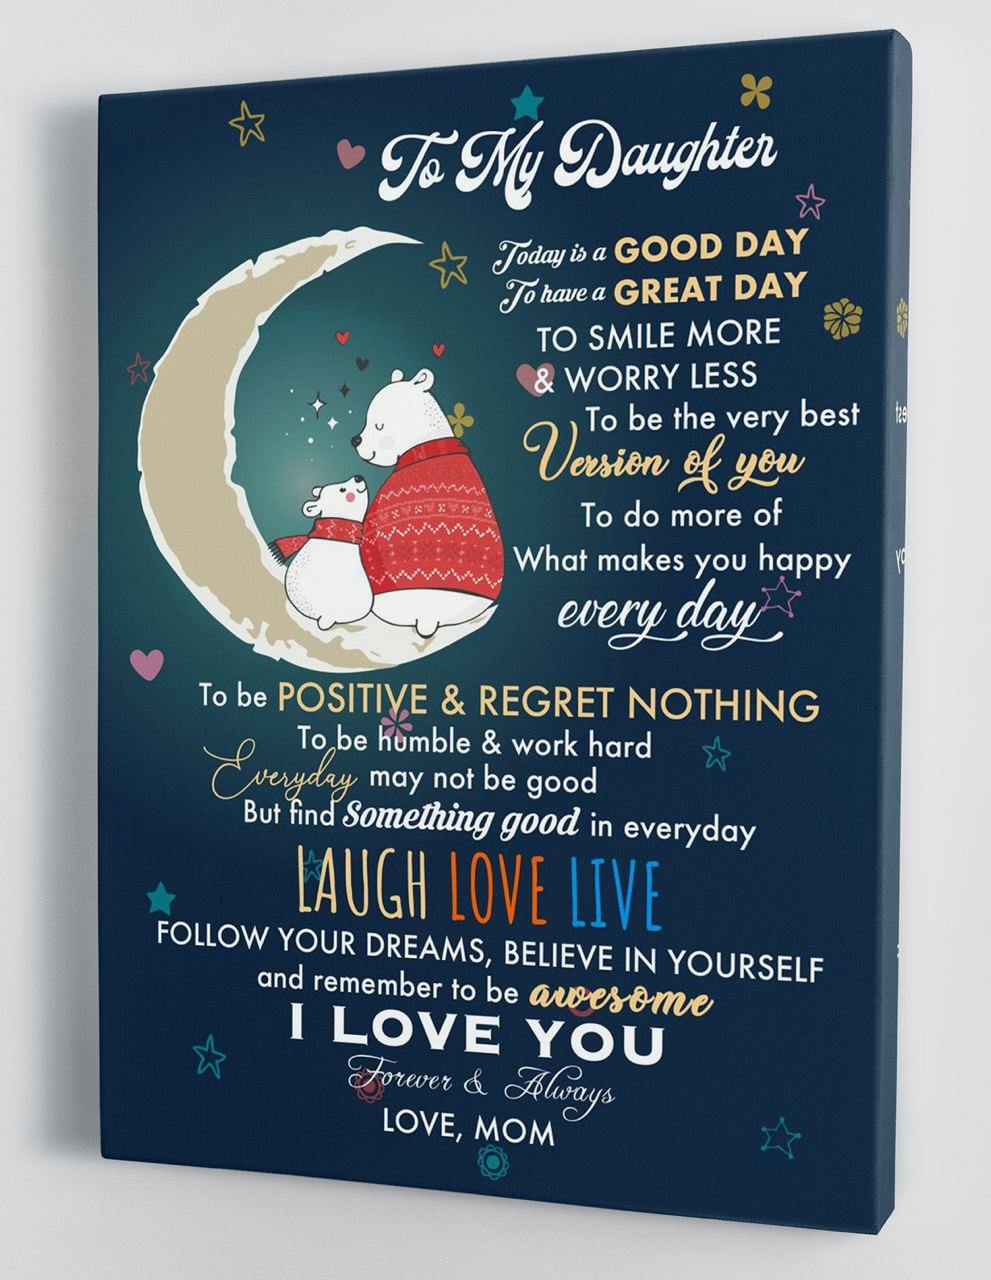 To My Daughter - From Mom - Christmas, Father's Day, Mother's Day Canvas Gift MD061 - DivesArt LLC